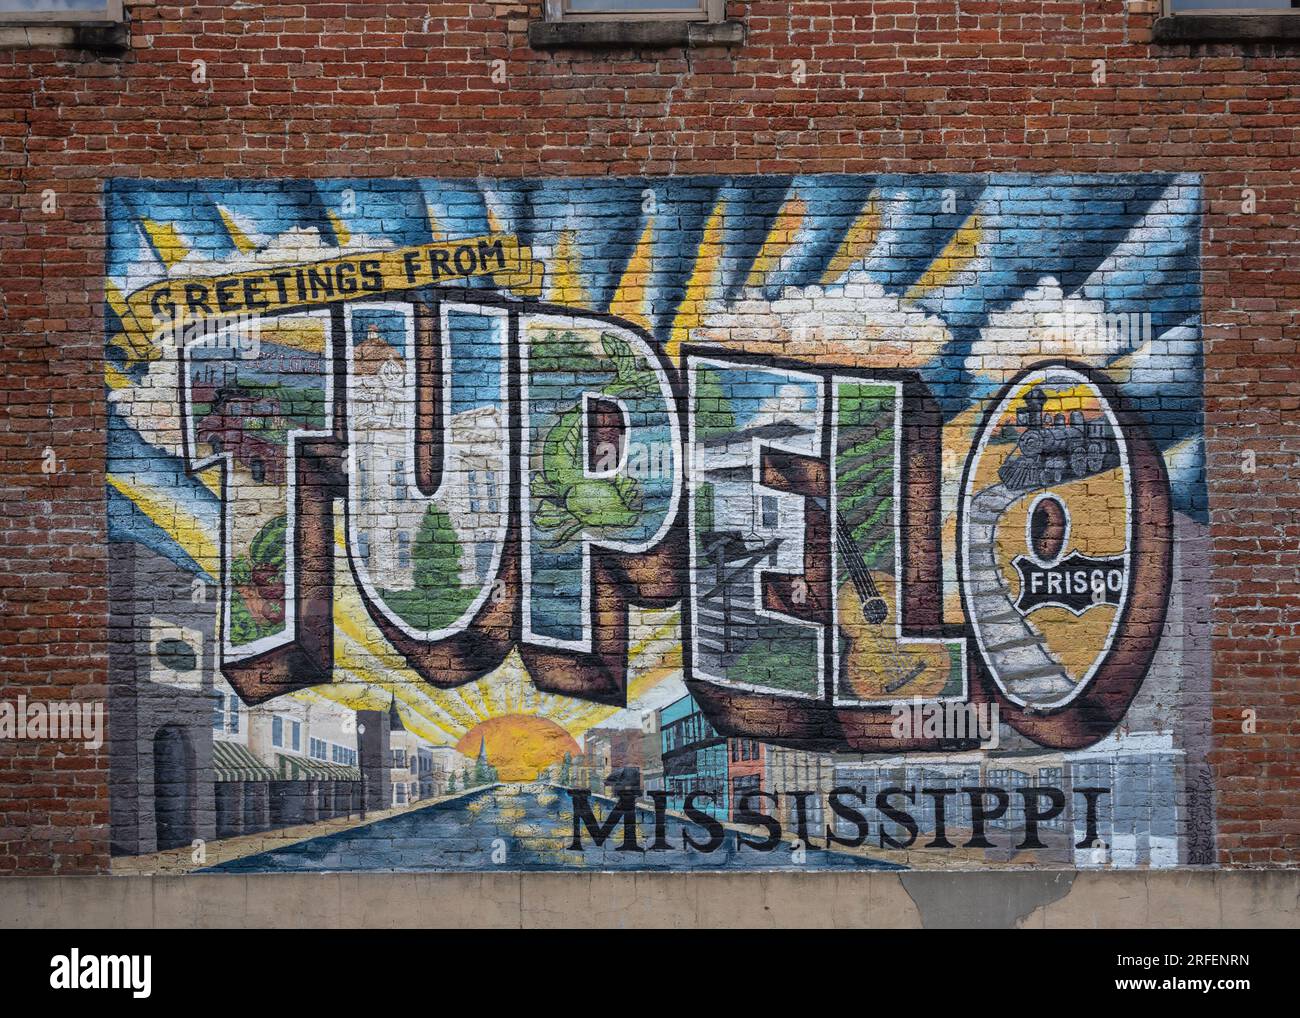 Greetings From Tupelo mural, Tupelo, on the Natchez Trace Parkway, Mississippi. Stock Photo